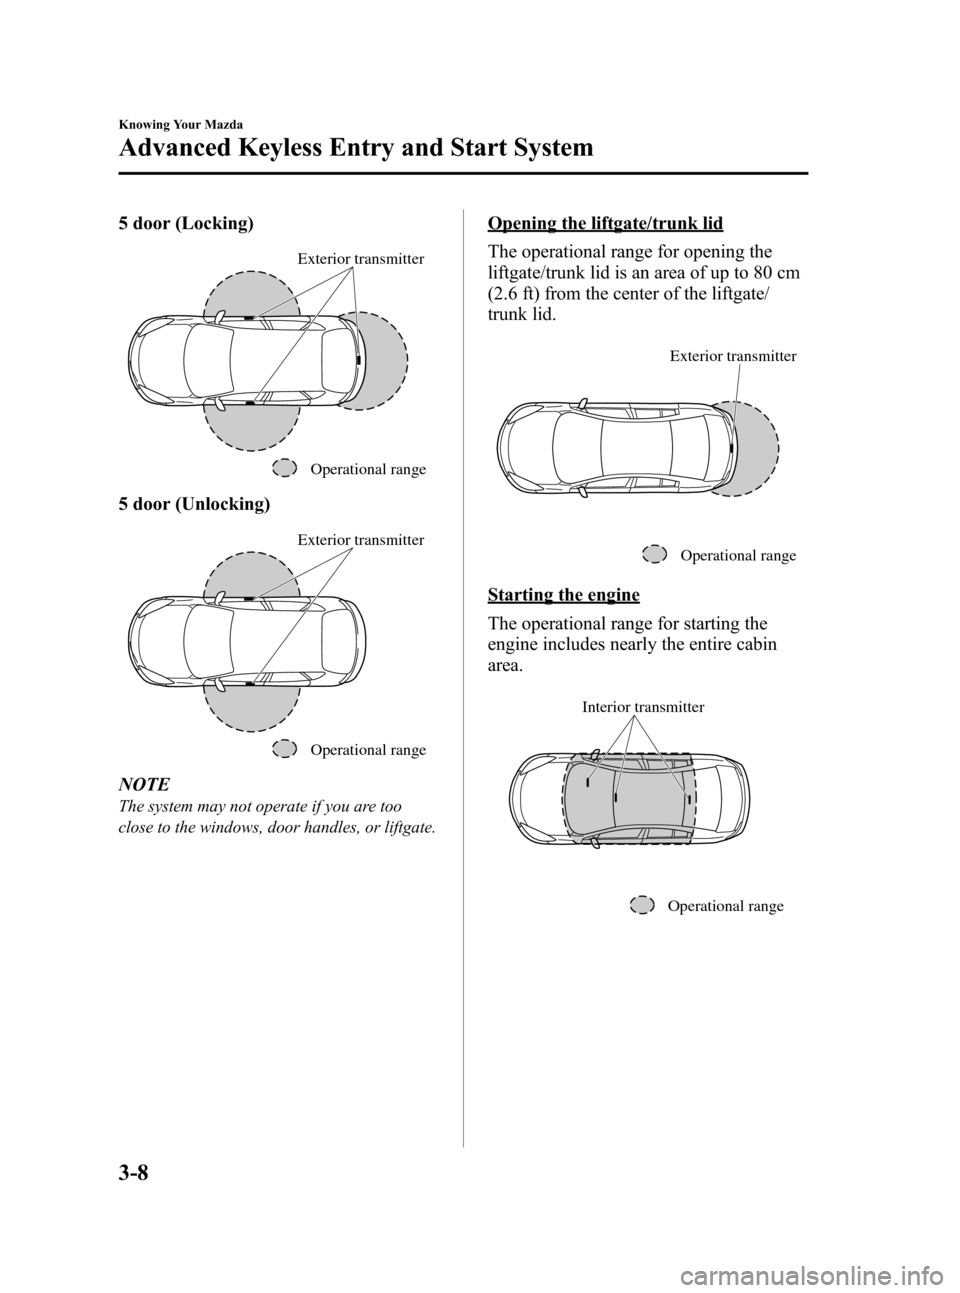 MAZDA MODEL 3 HATCHBACK 2010  Owners Manual (in English) Black plate (84,1)
5 door (Locking)
Operational range Exterior transmitter
5 door (Unlocking)
Operational range Exterior transmitter
NOTE
The system may not operate if you are too
close to the windows